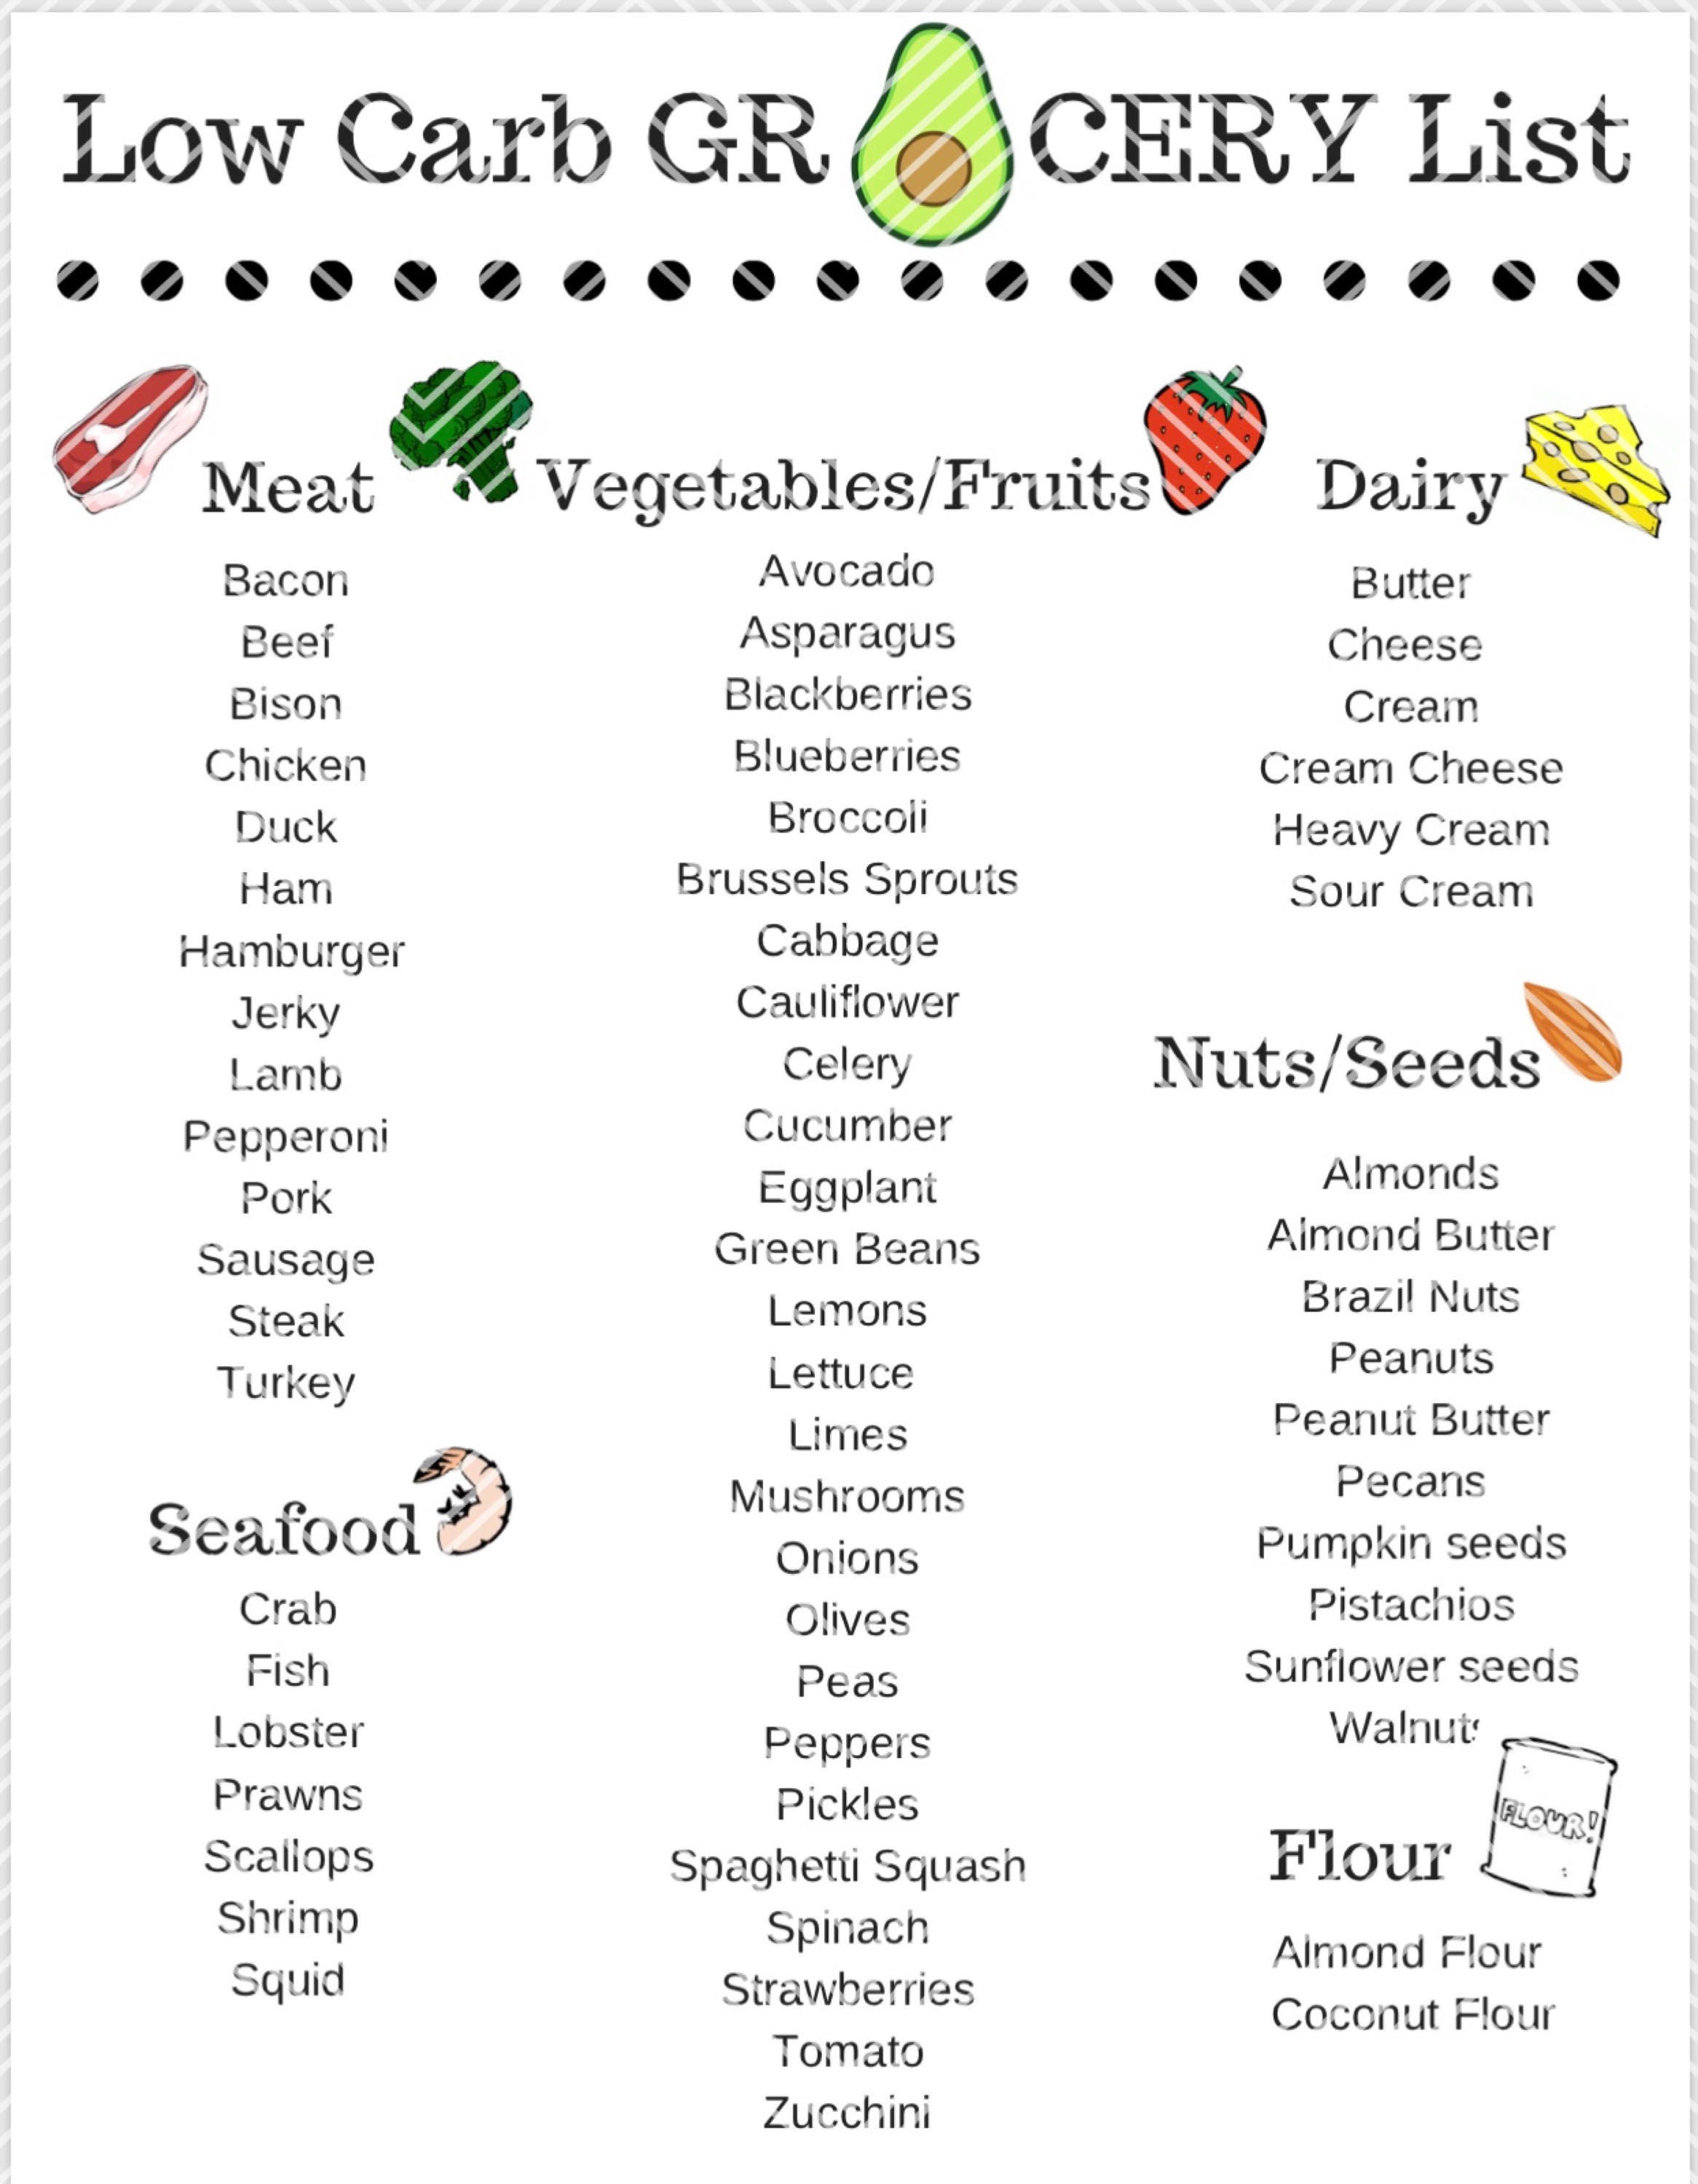 printable-low-carb-grocery-list-that-are-agile-wright-website-how-to